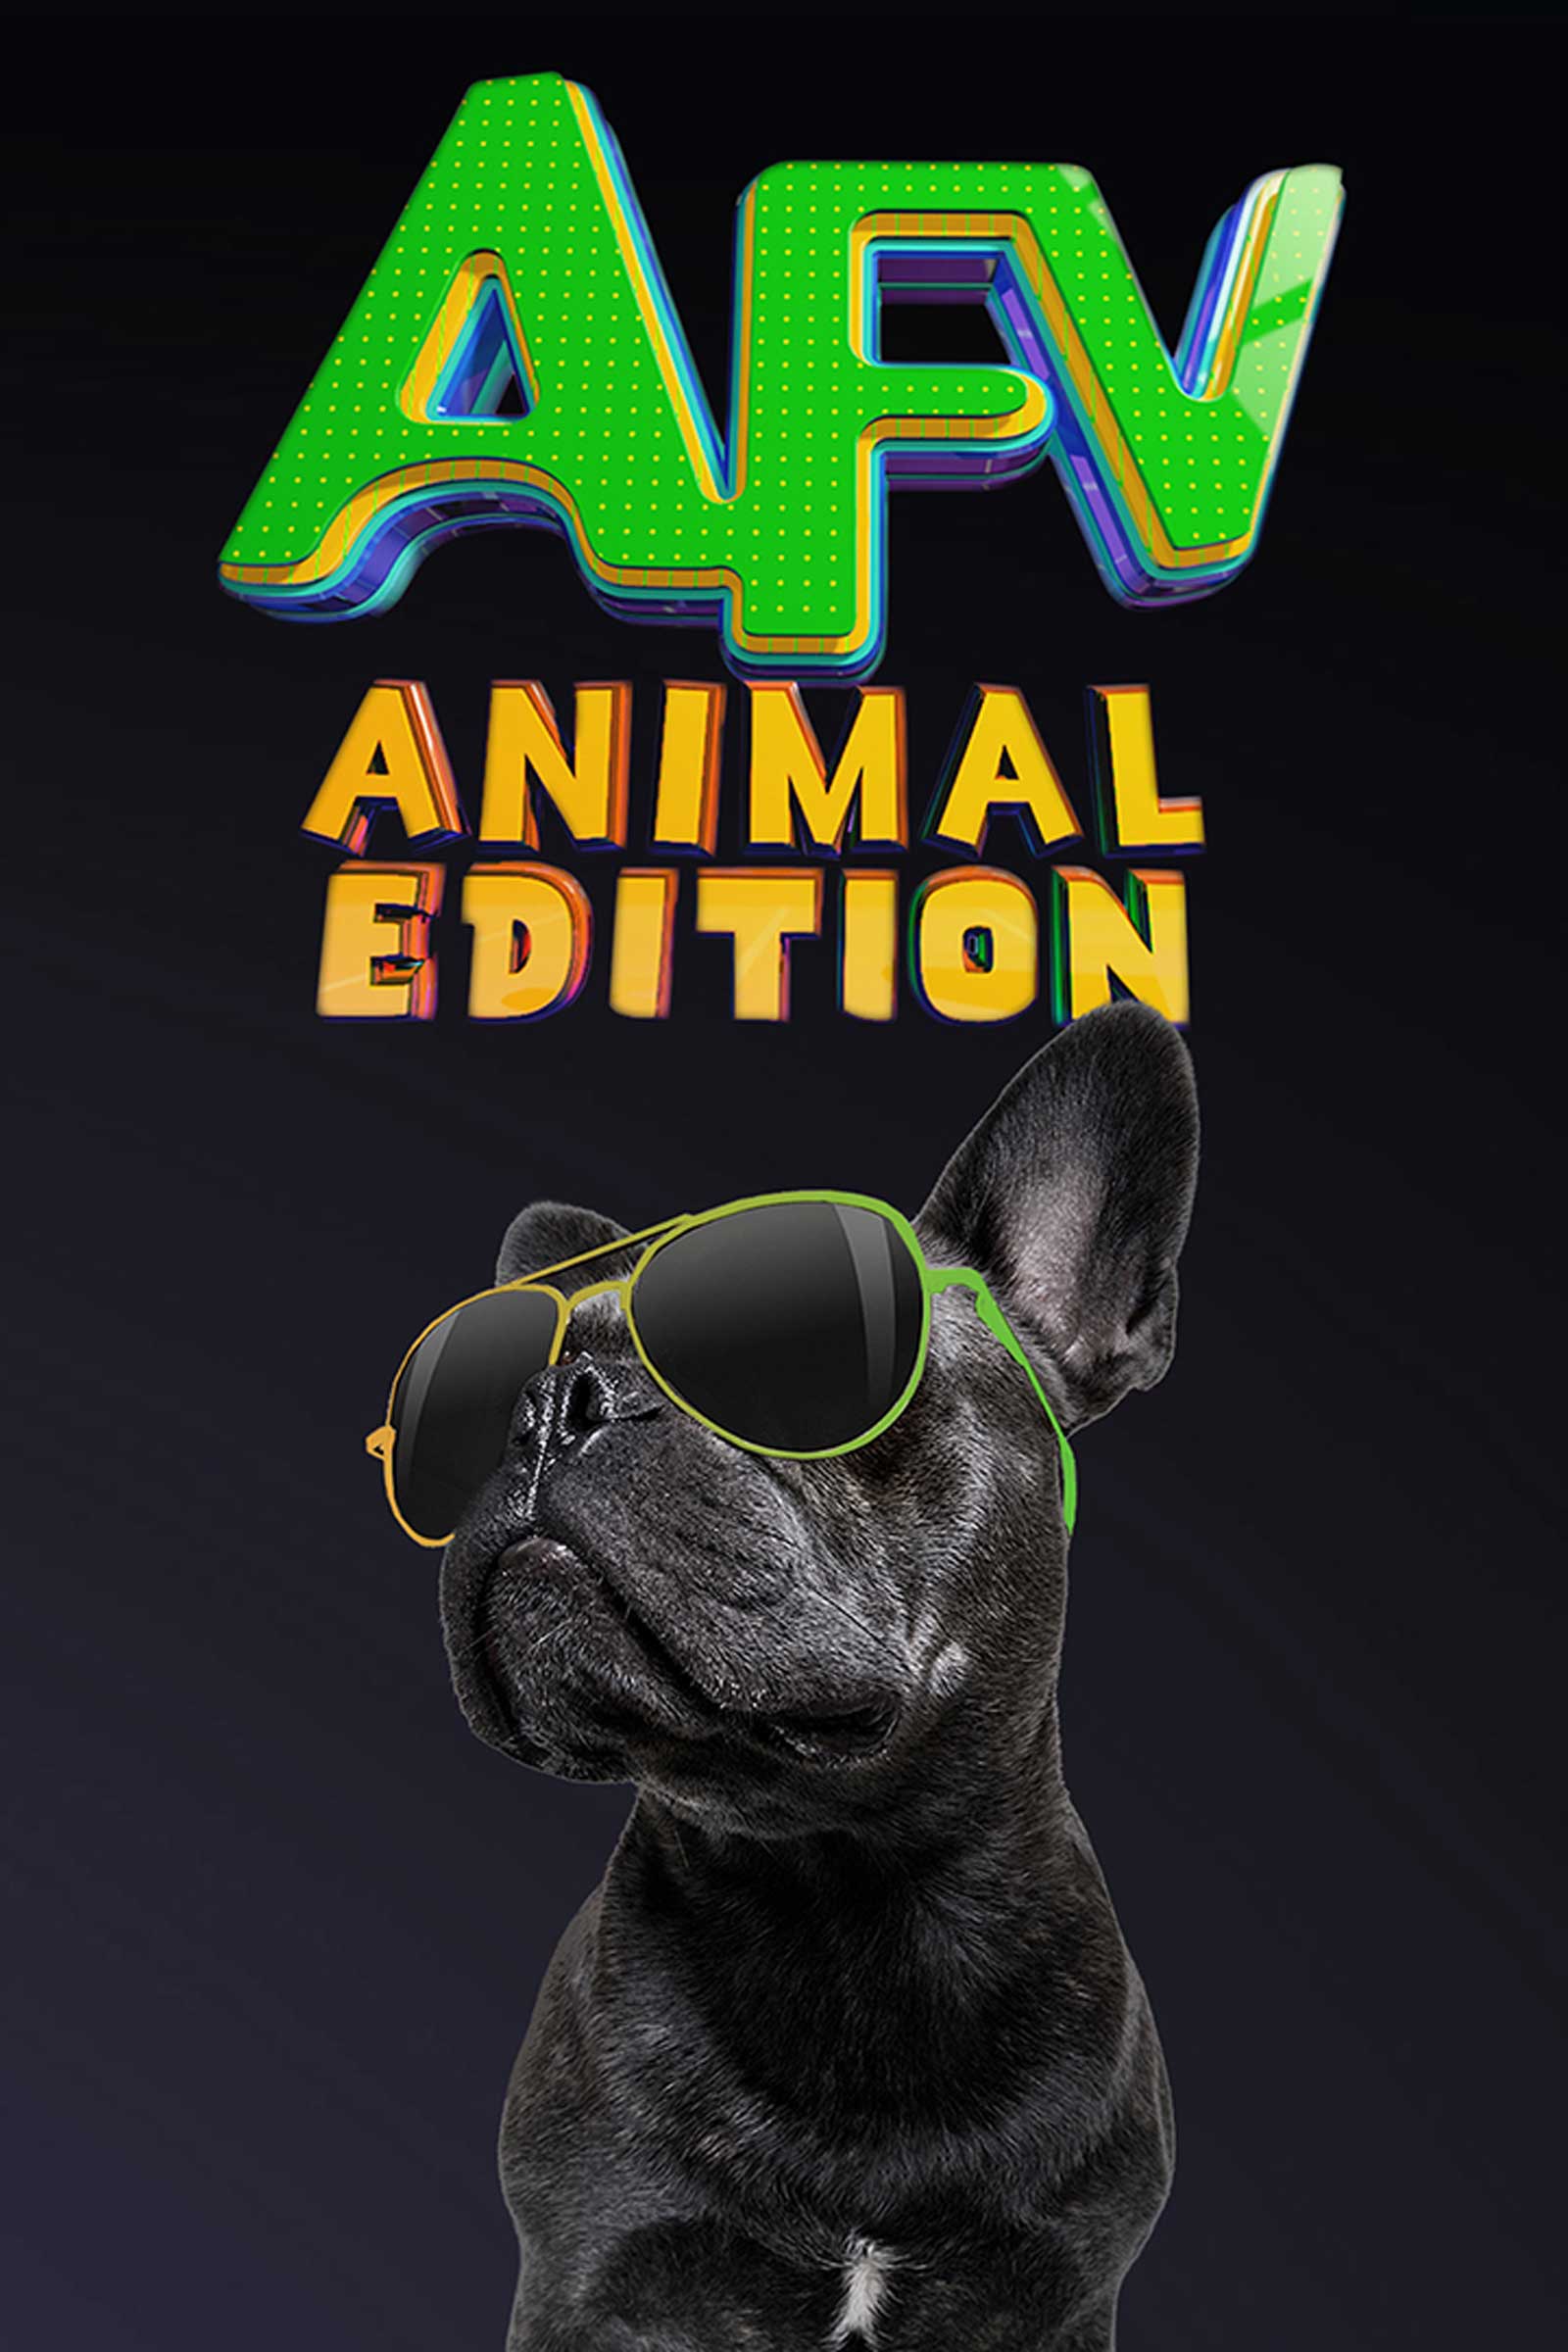 America's funniest Home Videos. Animals edition